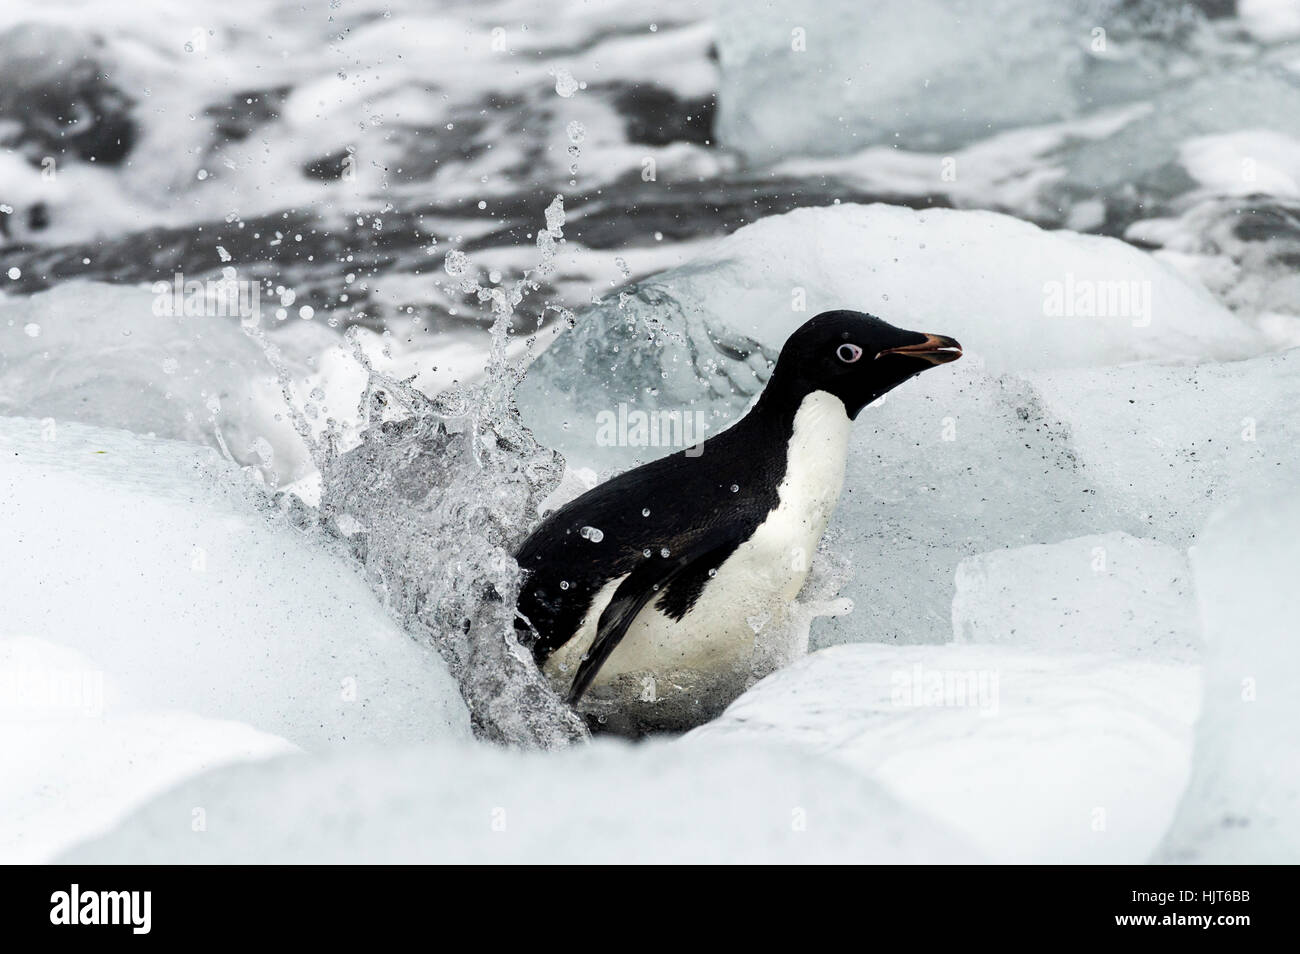 An Adelie Penguin trying to reach the shore though a field of ice boulders. Stock Photo